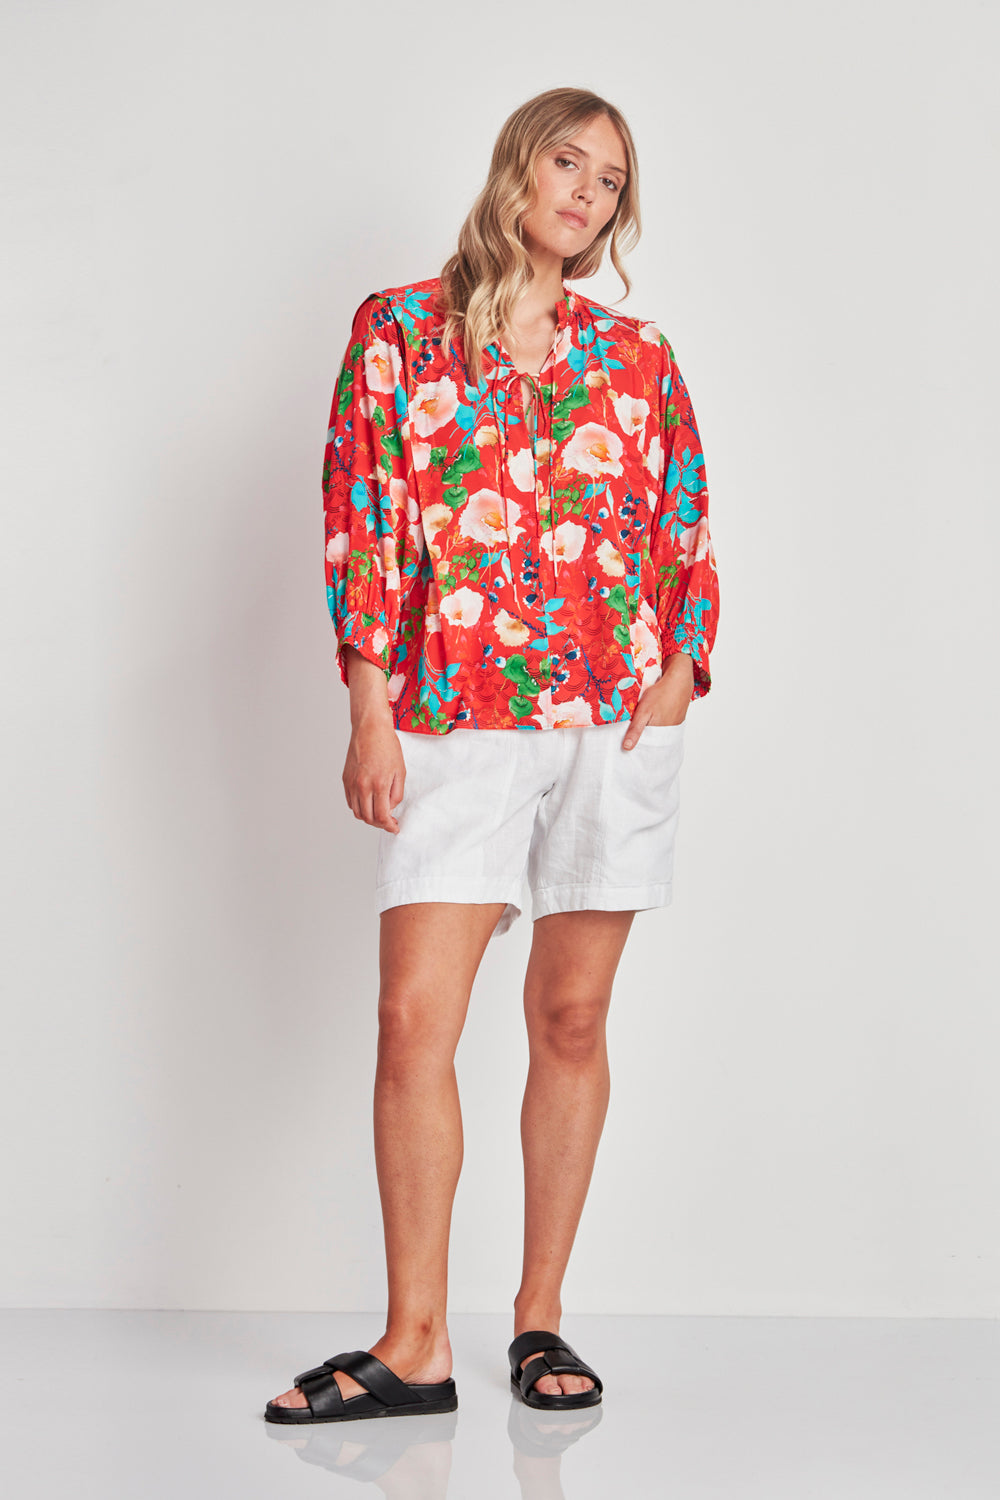 Aiko Blouse - Red Floral Print - VERGE